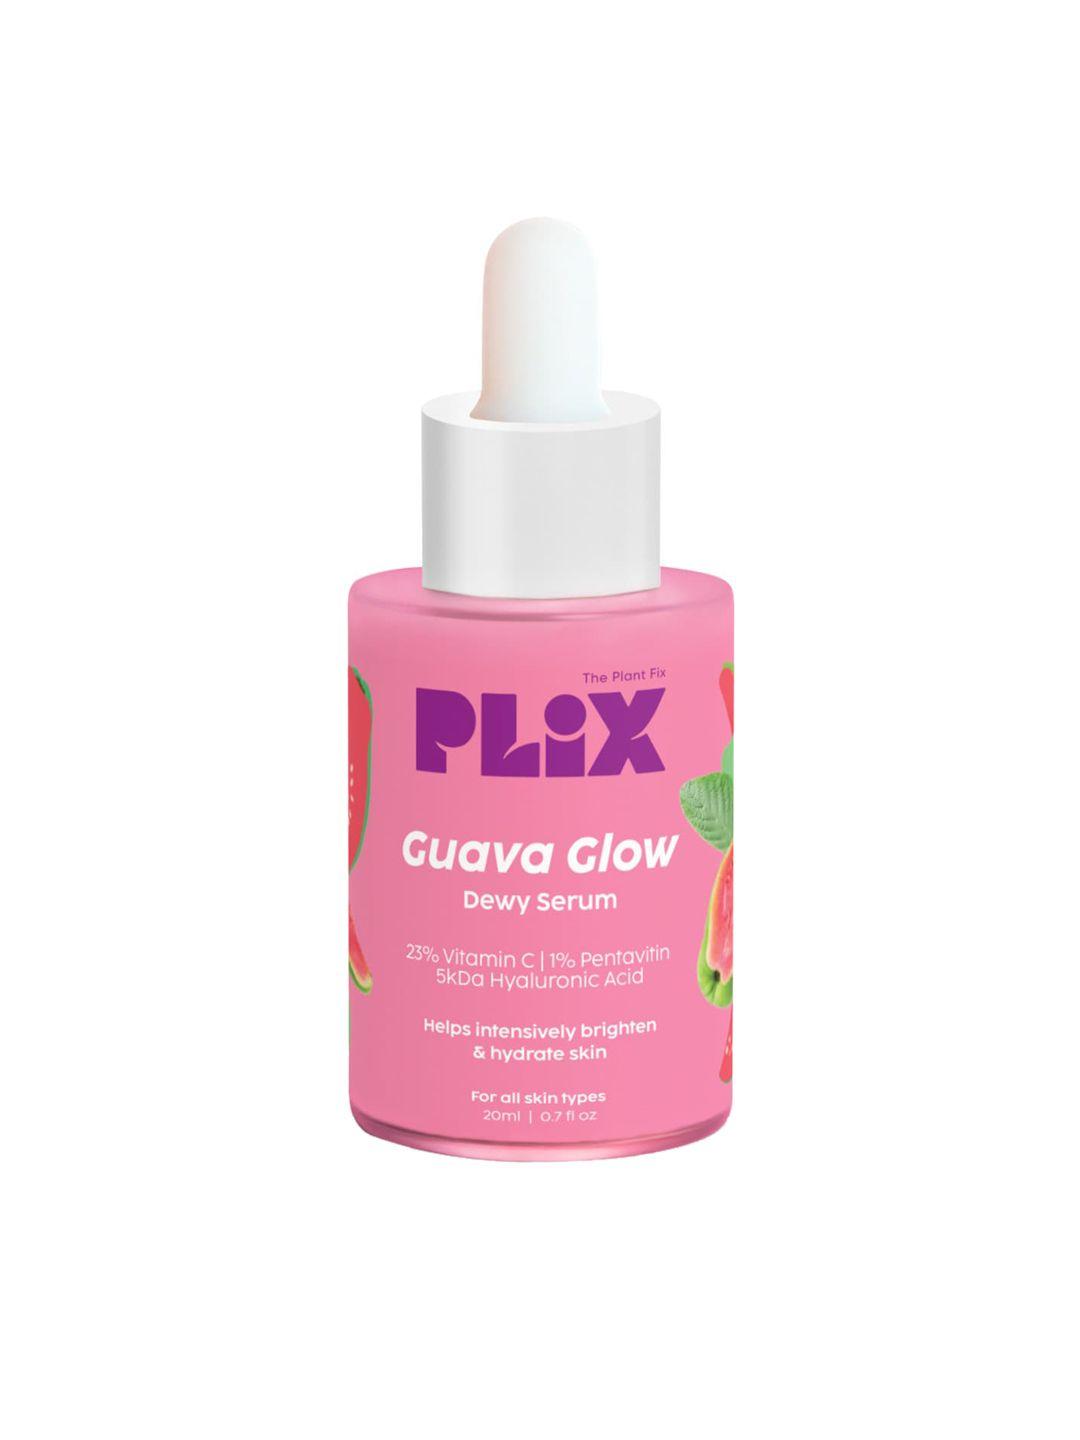 plix the plant fix guava glow dewy serum with vitamin c & hyaluronic acid - 20 ml